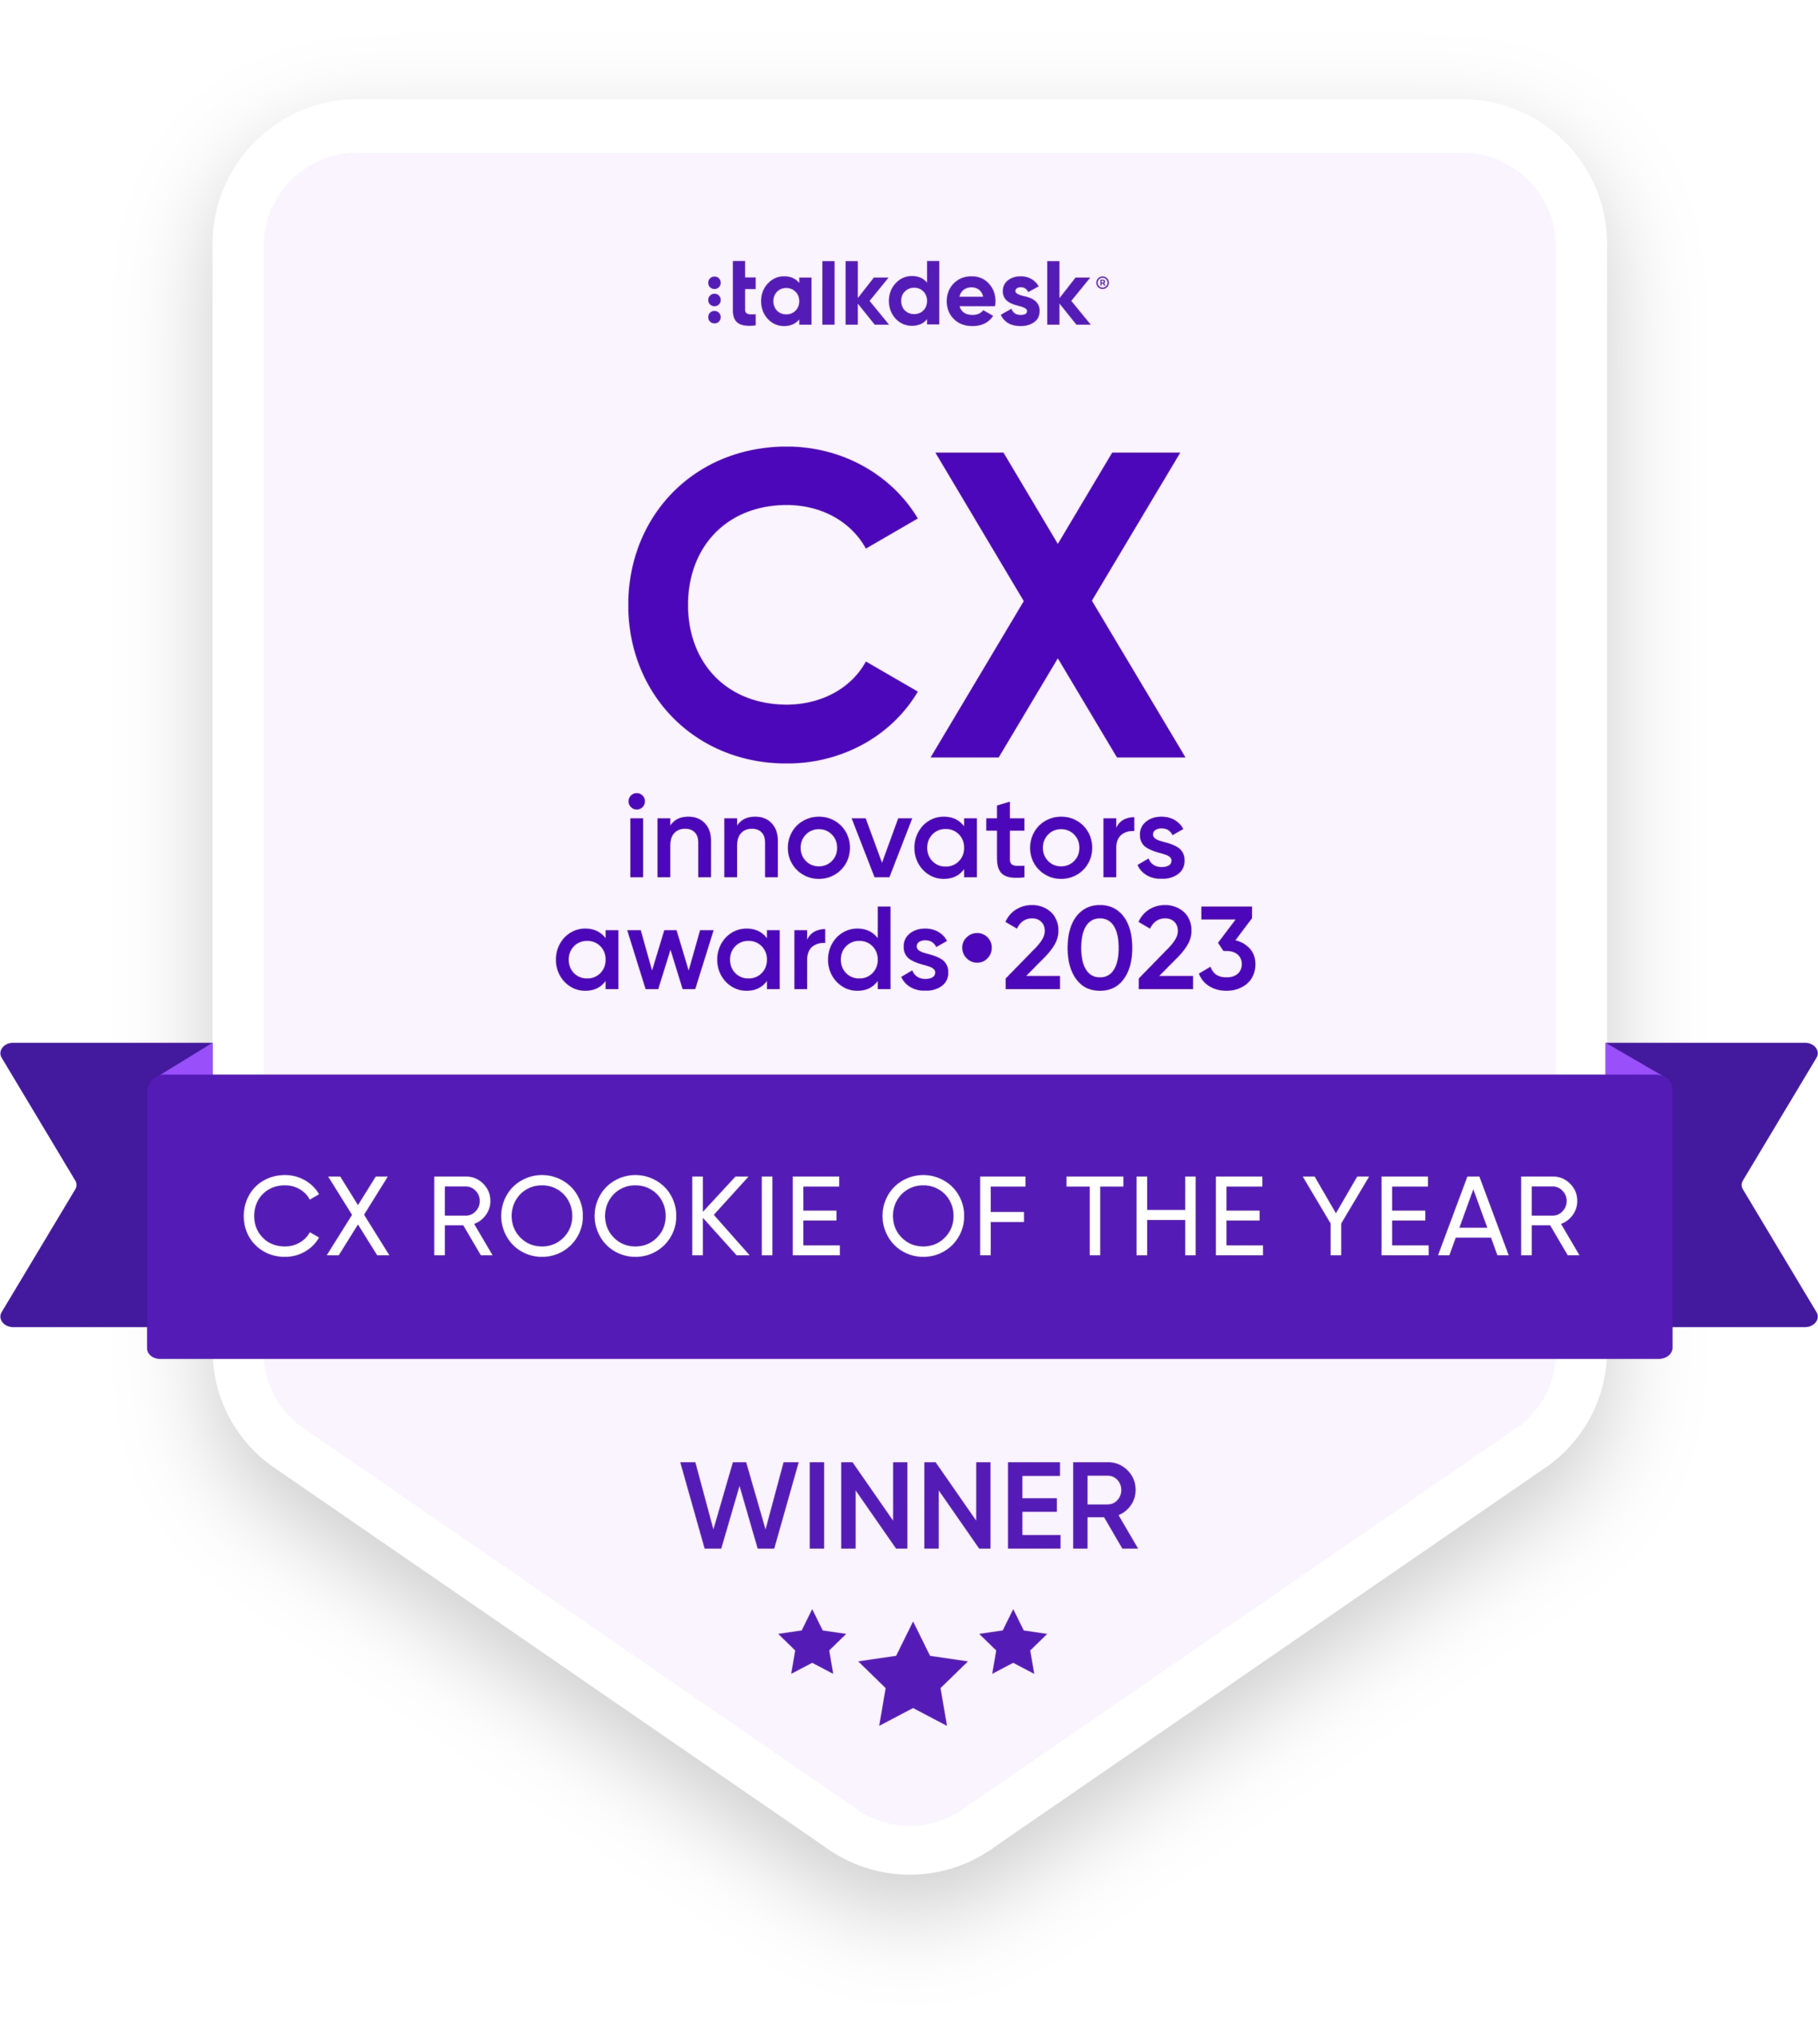 CX Rookie Of The Year Award 2023